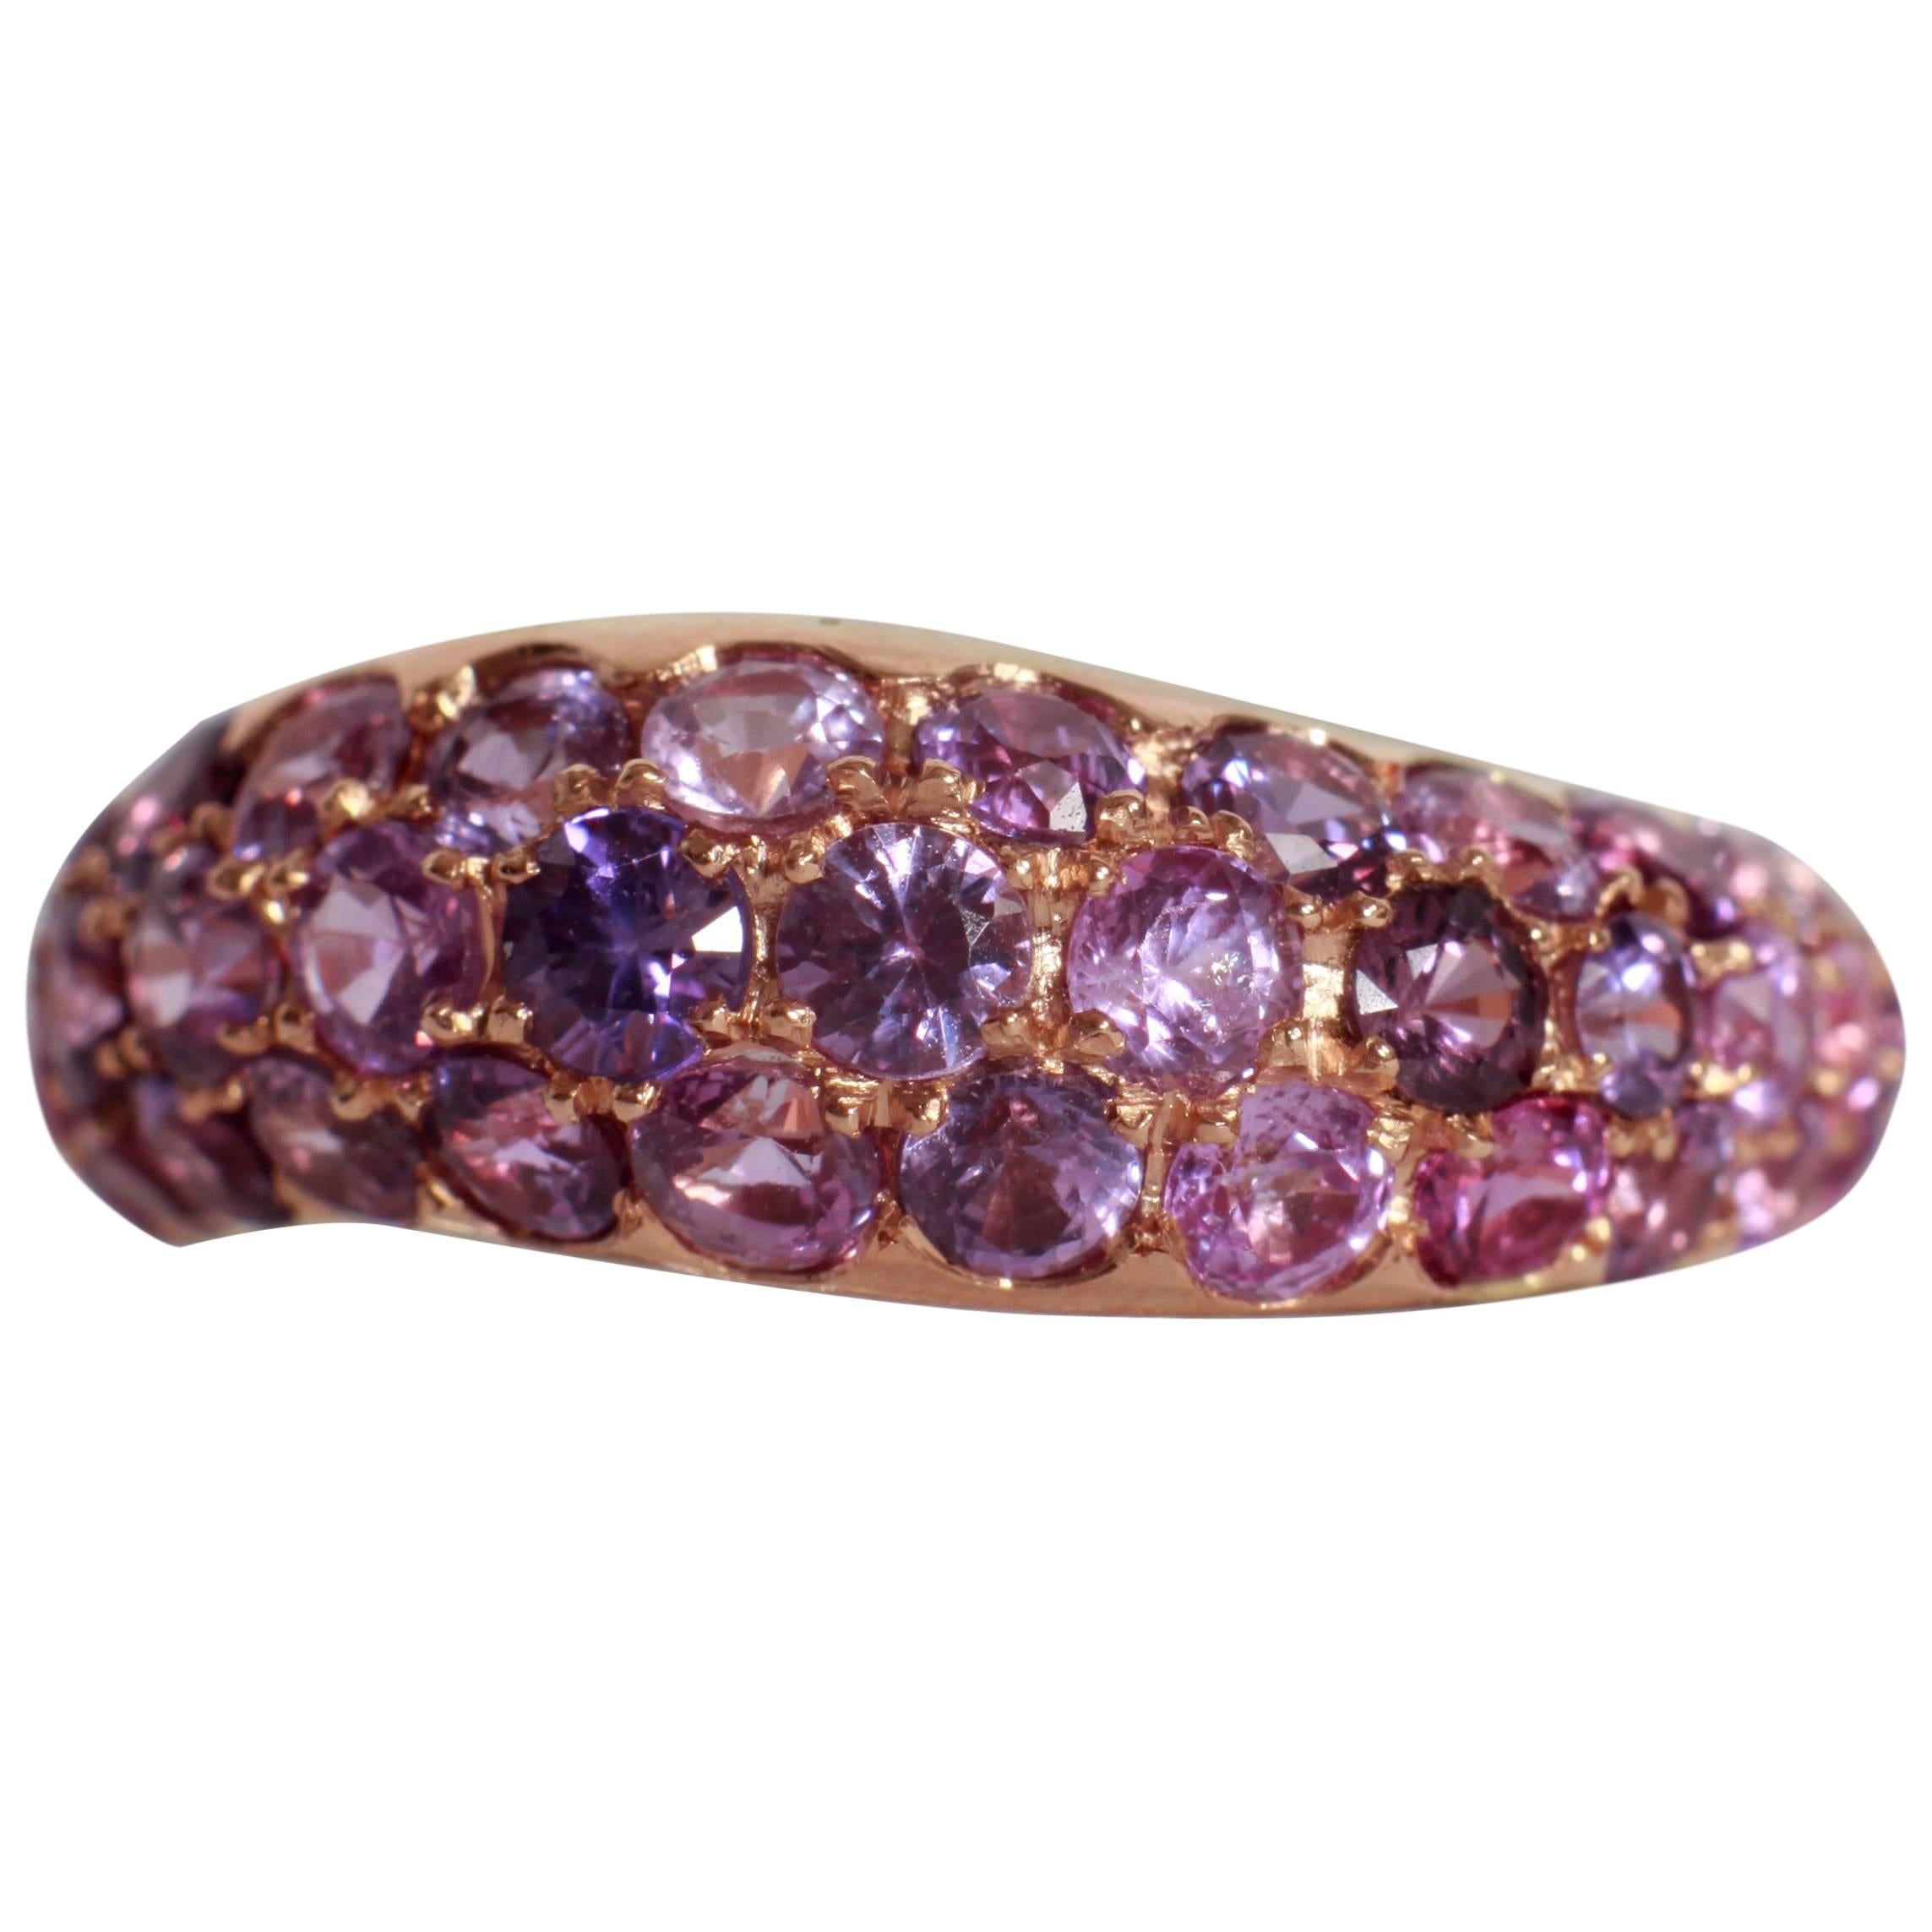 3,15 Carats Wavy Pink Sapphire Pave-Set Band Ring in 18K Pink Gold